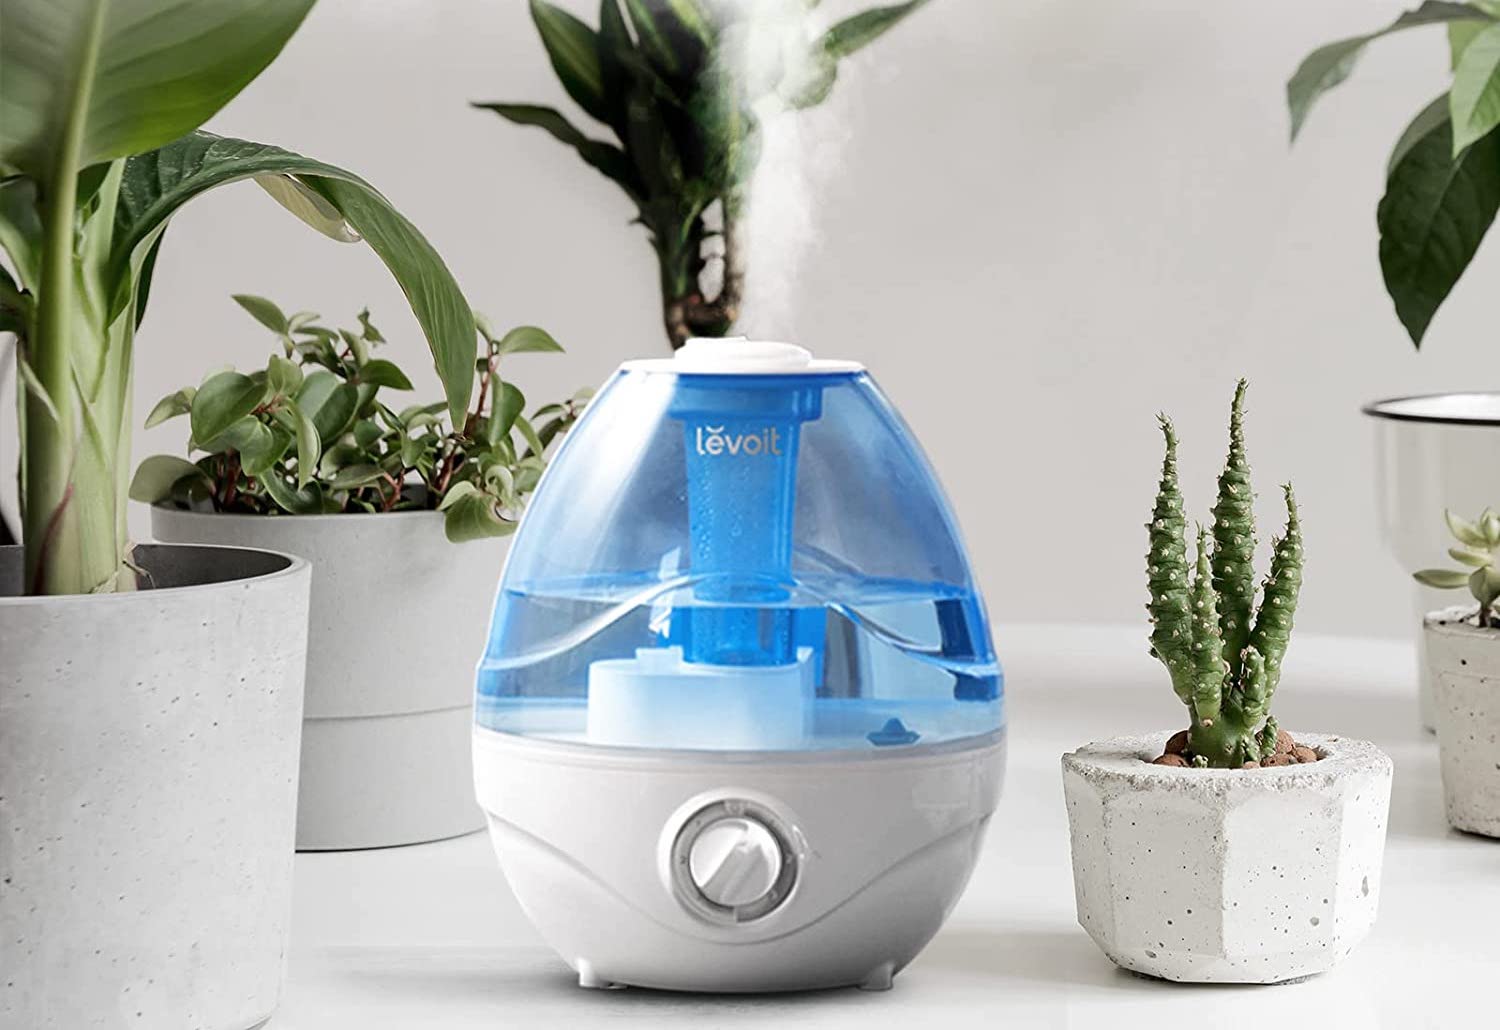 Top Considerations for Selecting the Best Plant Humidifier for Your Indoor Plants